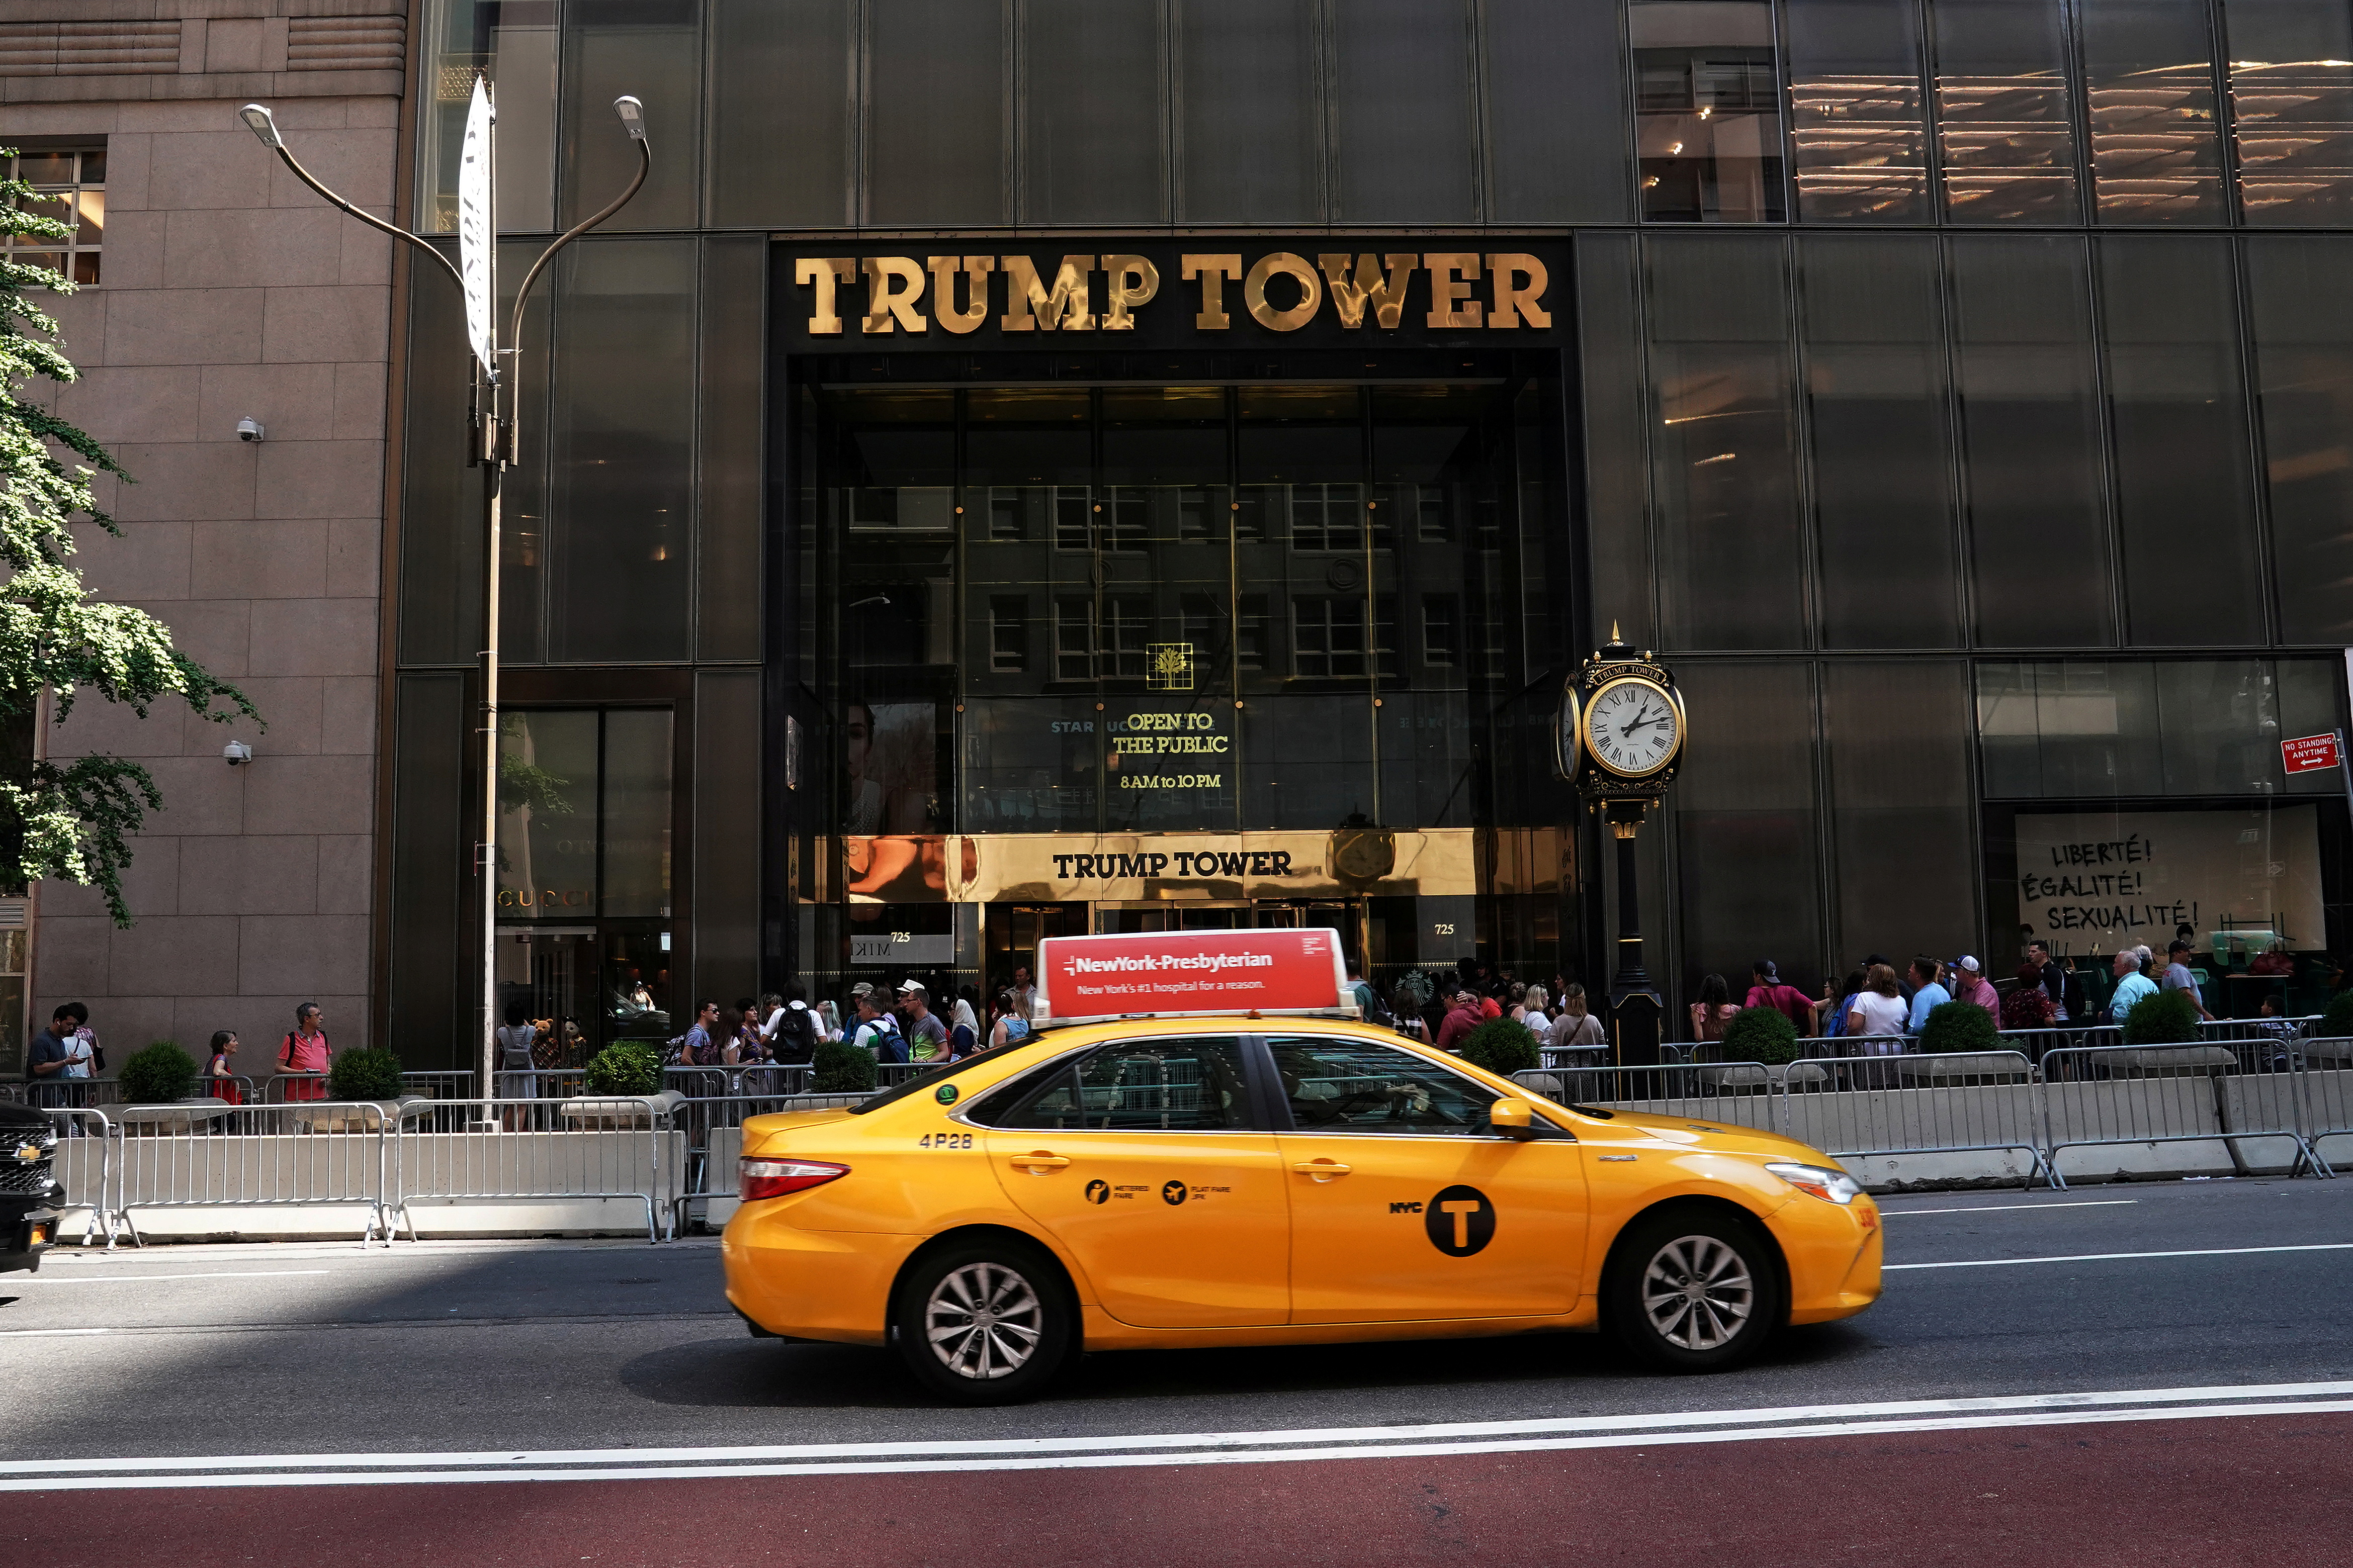 A taxi goes past Trump Tower in New York City